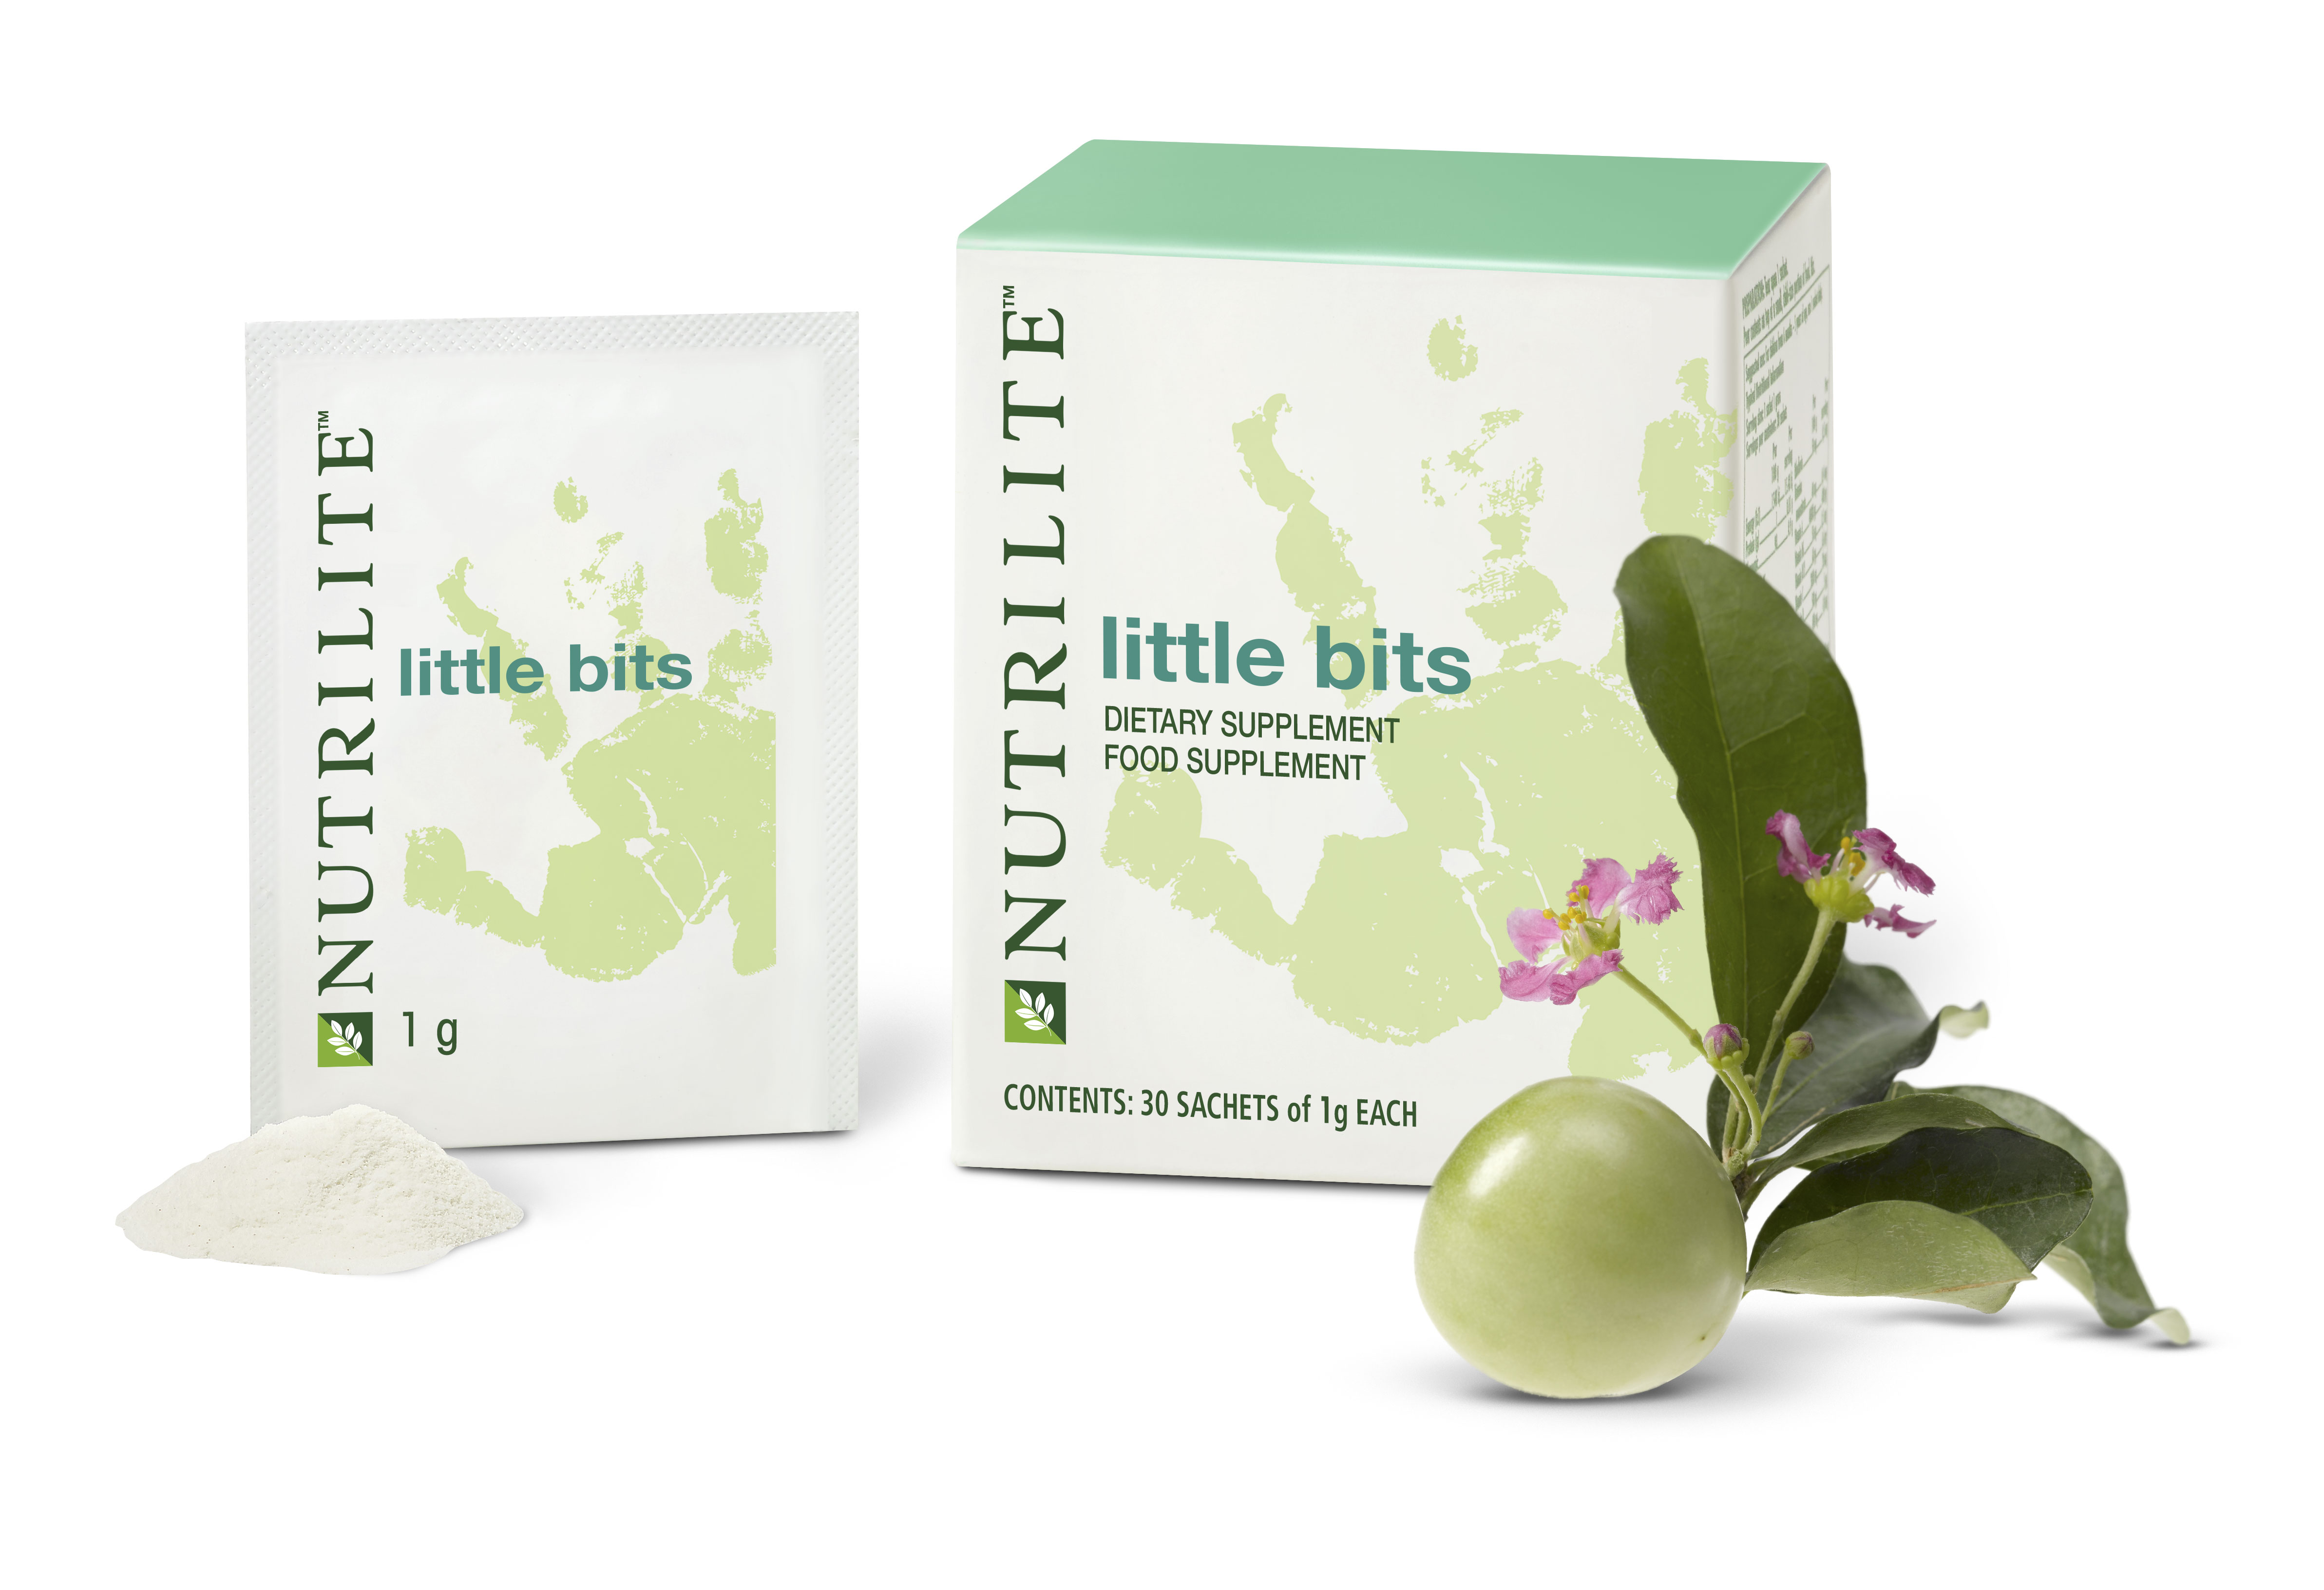 NUTRILITE™ Little Bits™ is the first and only micronutrient supplement for malnutrition enhanced with plant materials.* Each one-gram packet contains 15 essential vitamins and minerals and is a proven solution to fight global childhood malnutrition.  * ORC International